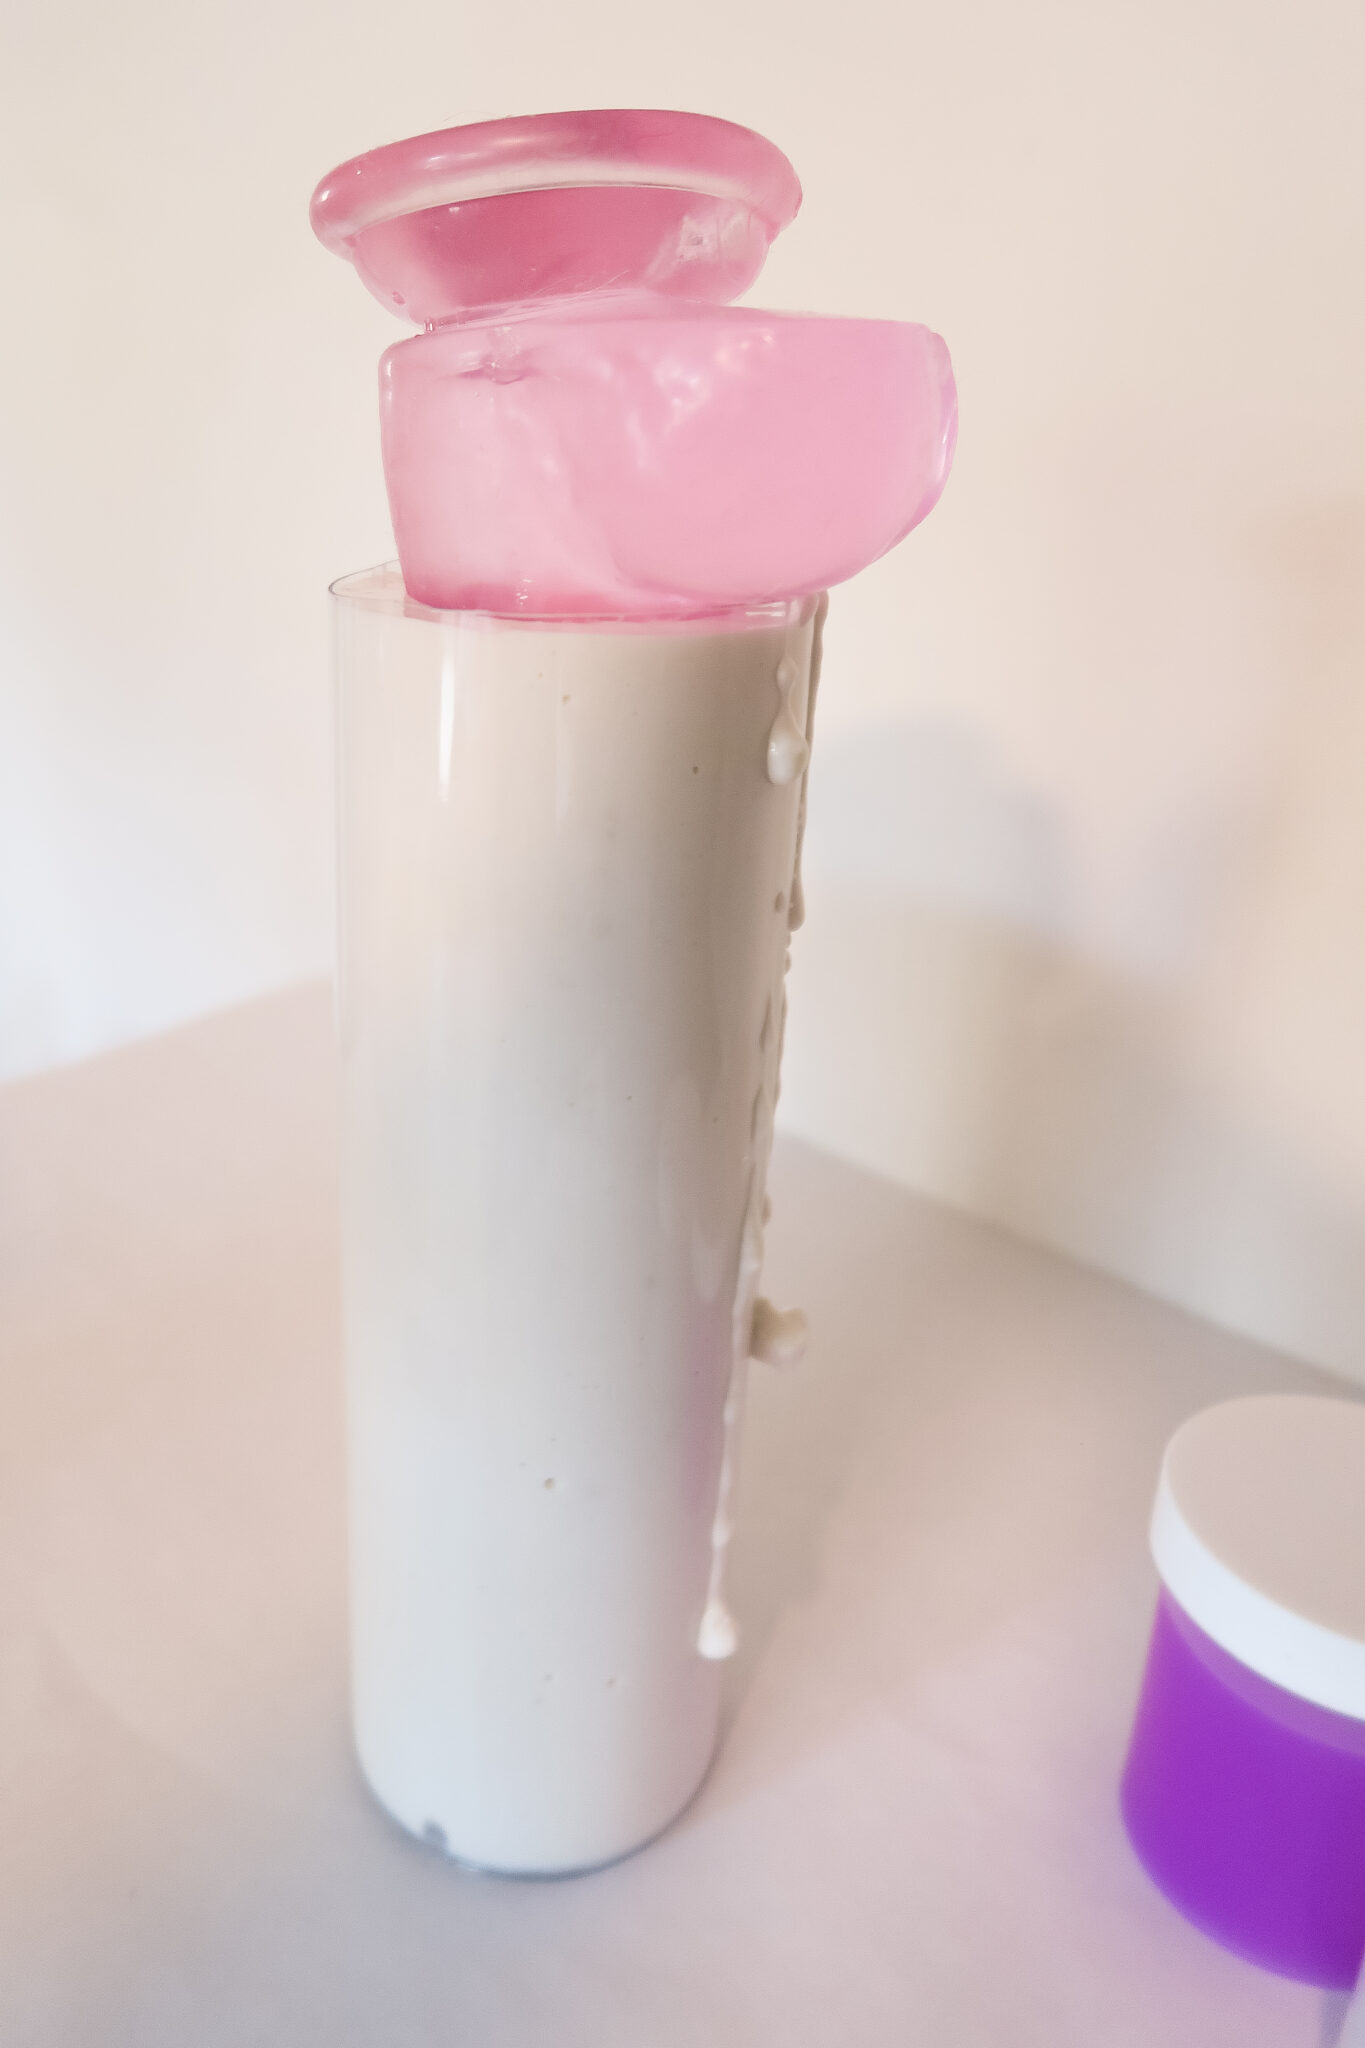 A pink dildo inside the Clone-A-Willy mold, creating the shape.